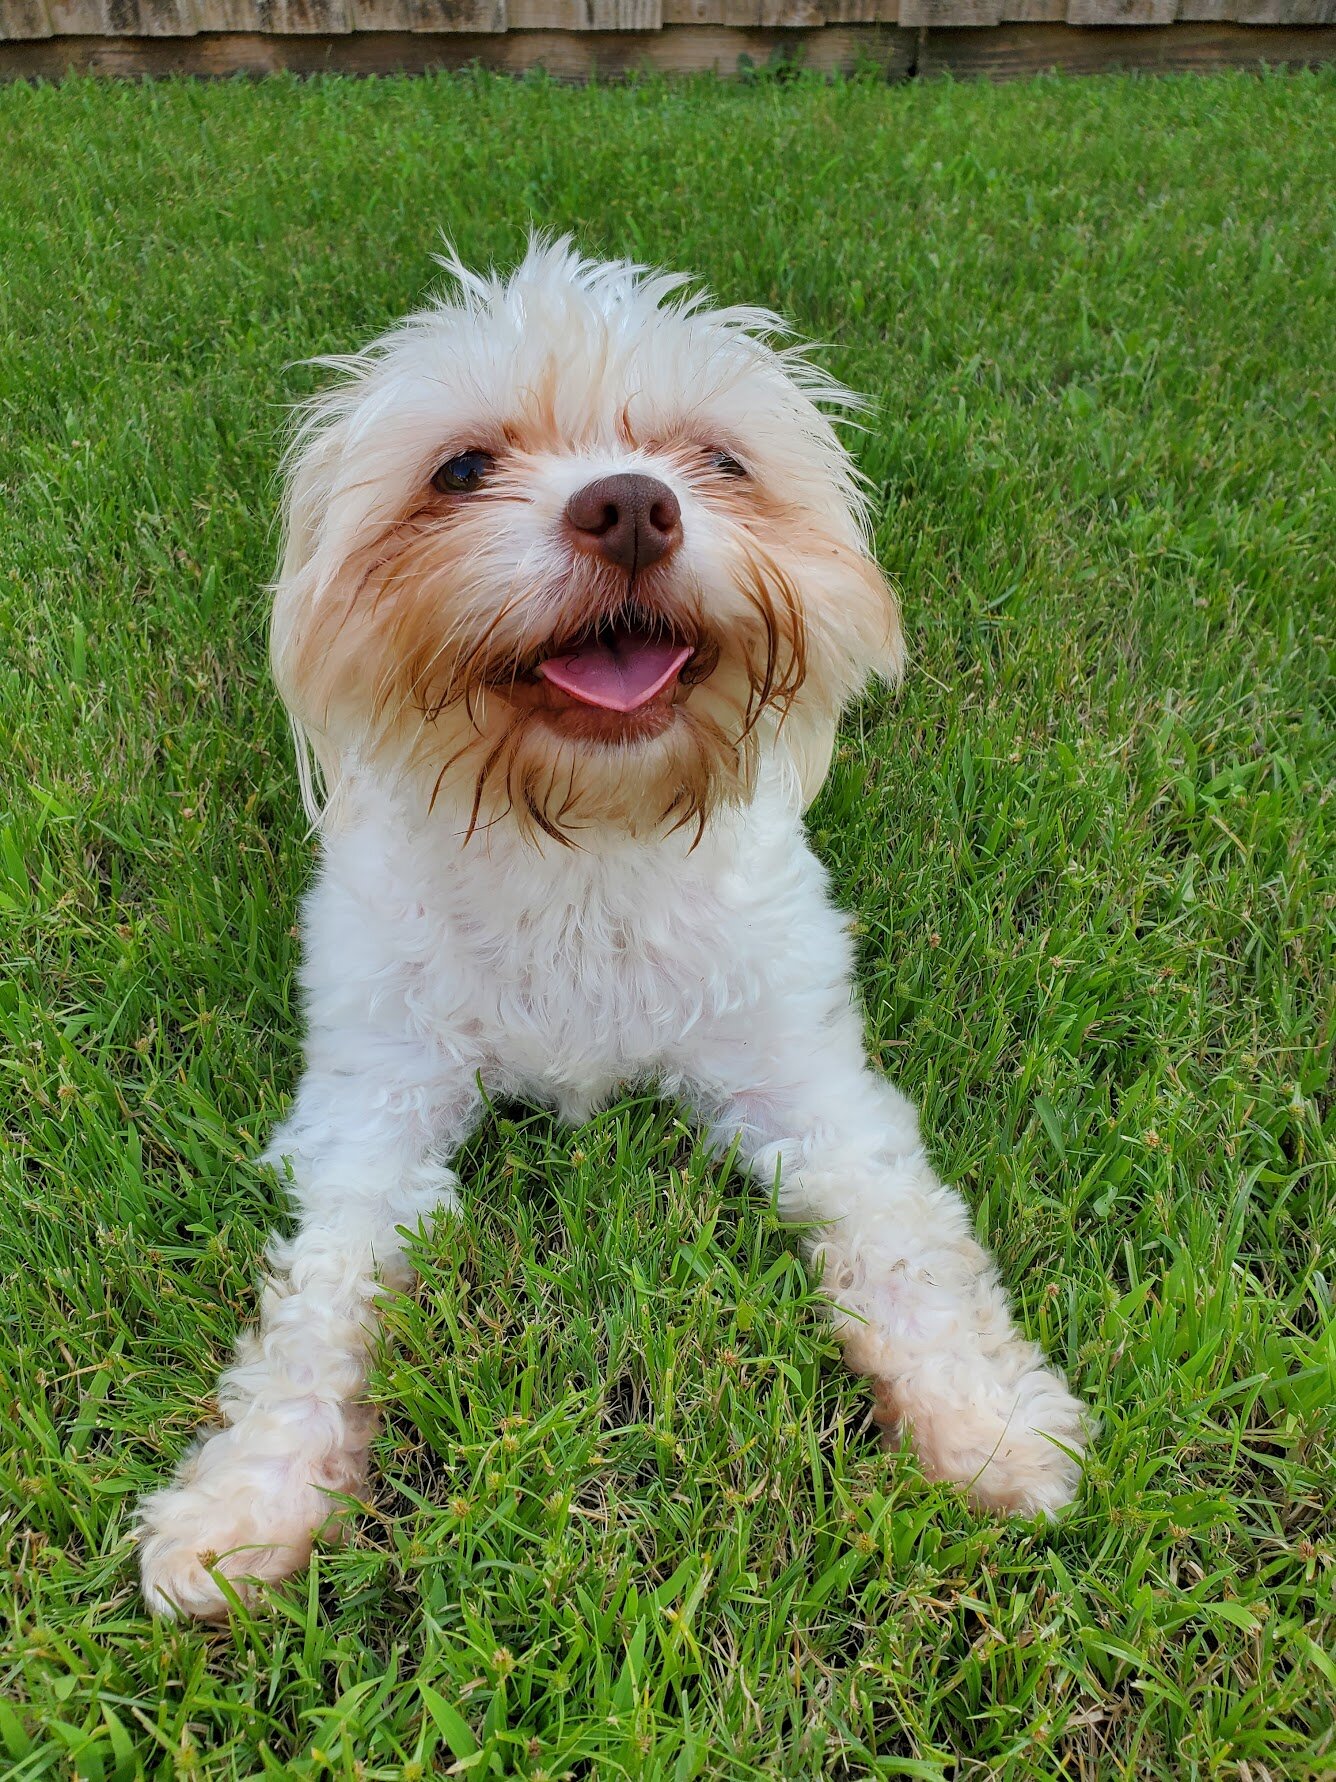  A white and tan dog smiling and laying down facing the camera on the grass.  